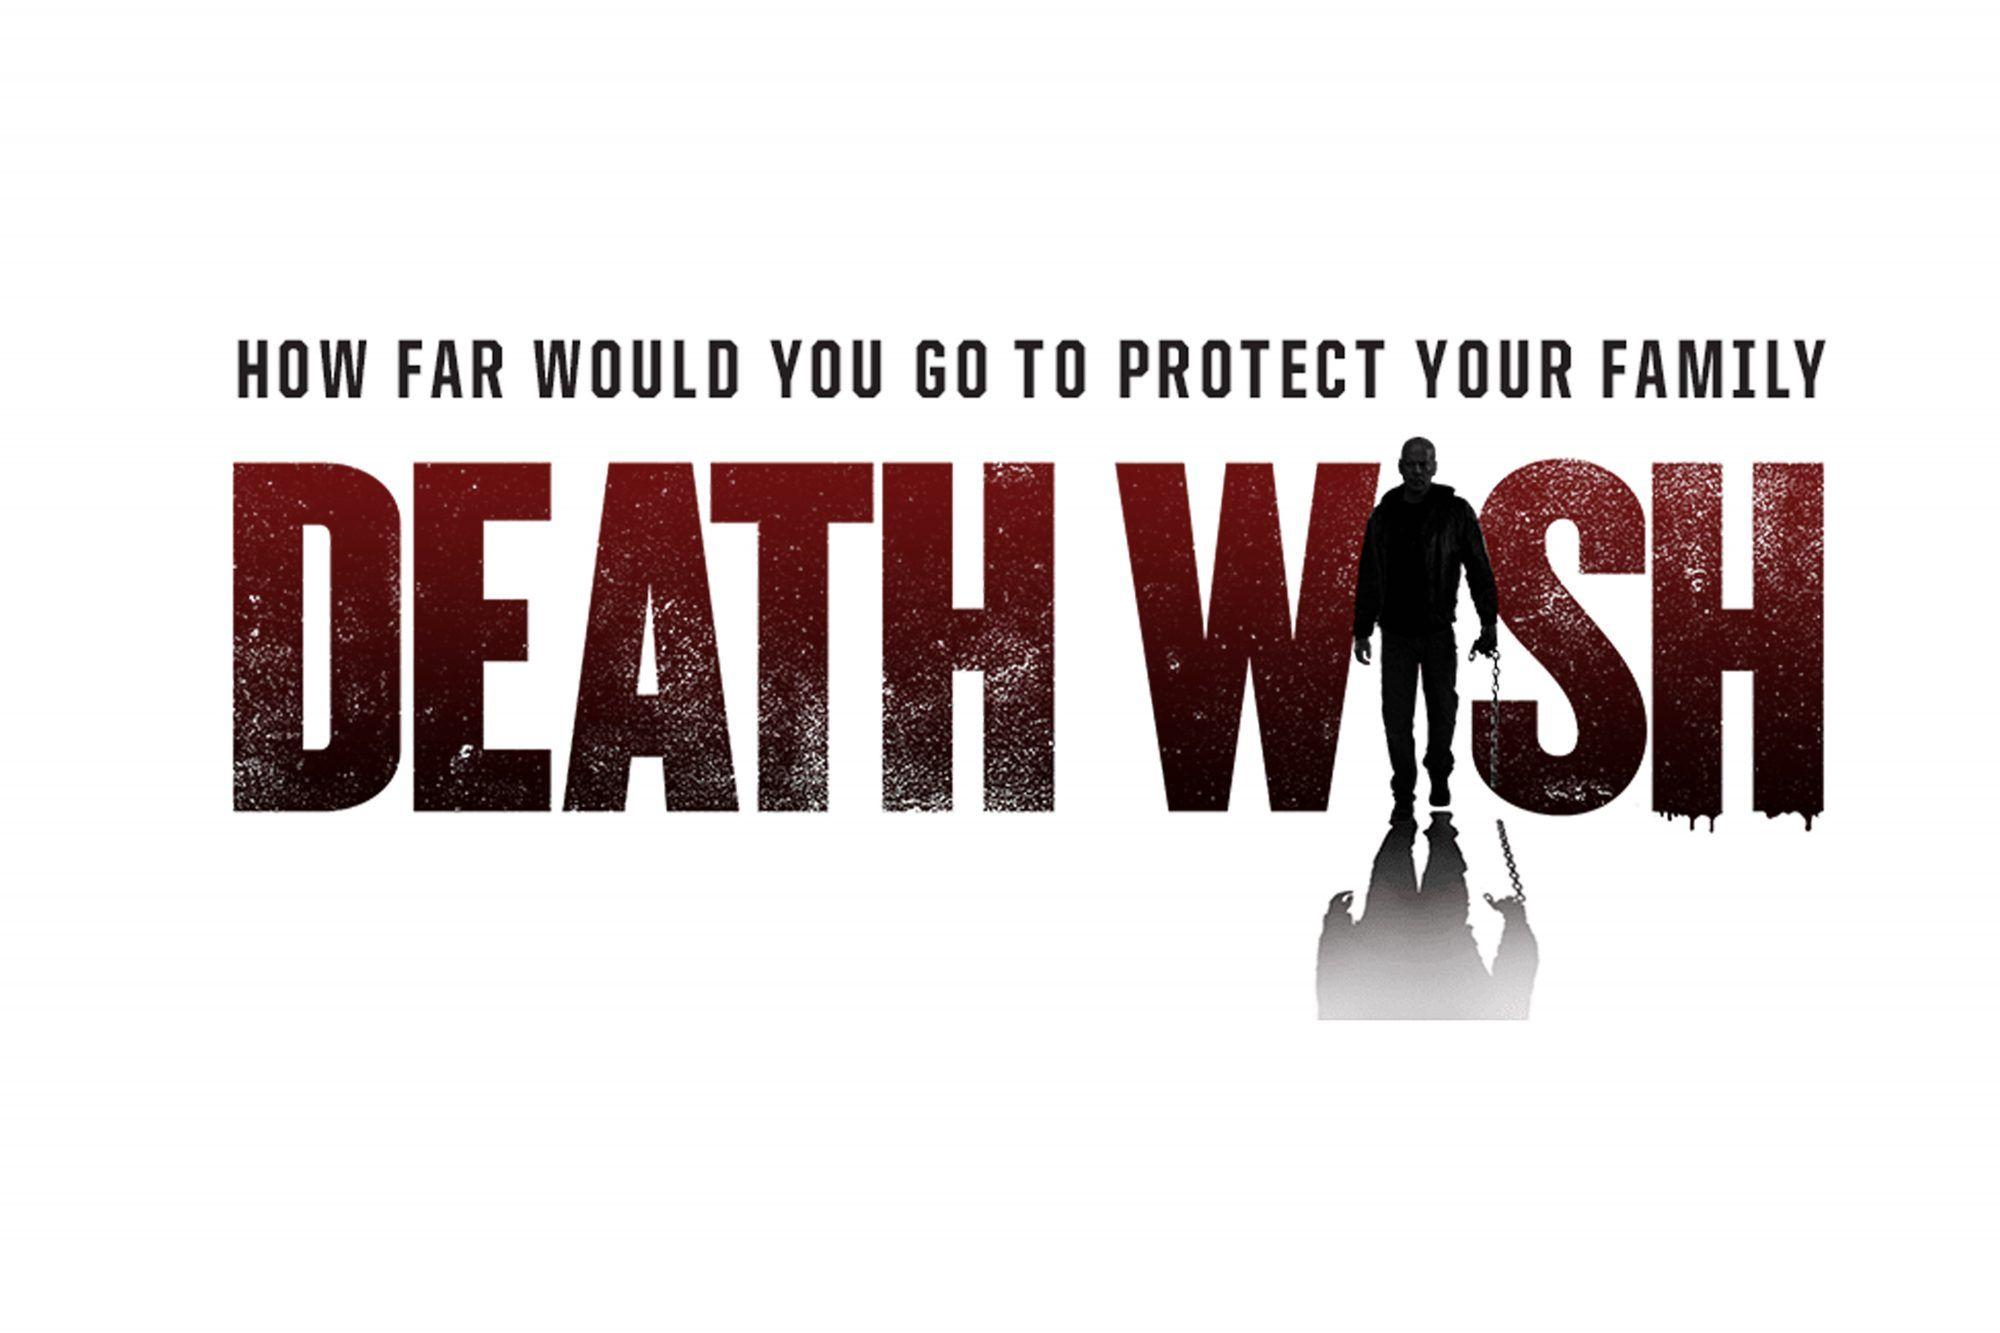 Death Wish Logo - Grab sneak preview tickets to see Bruce Willis in the remake